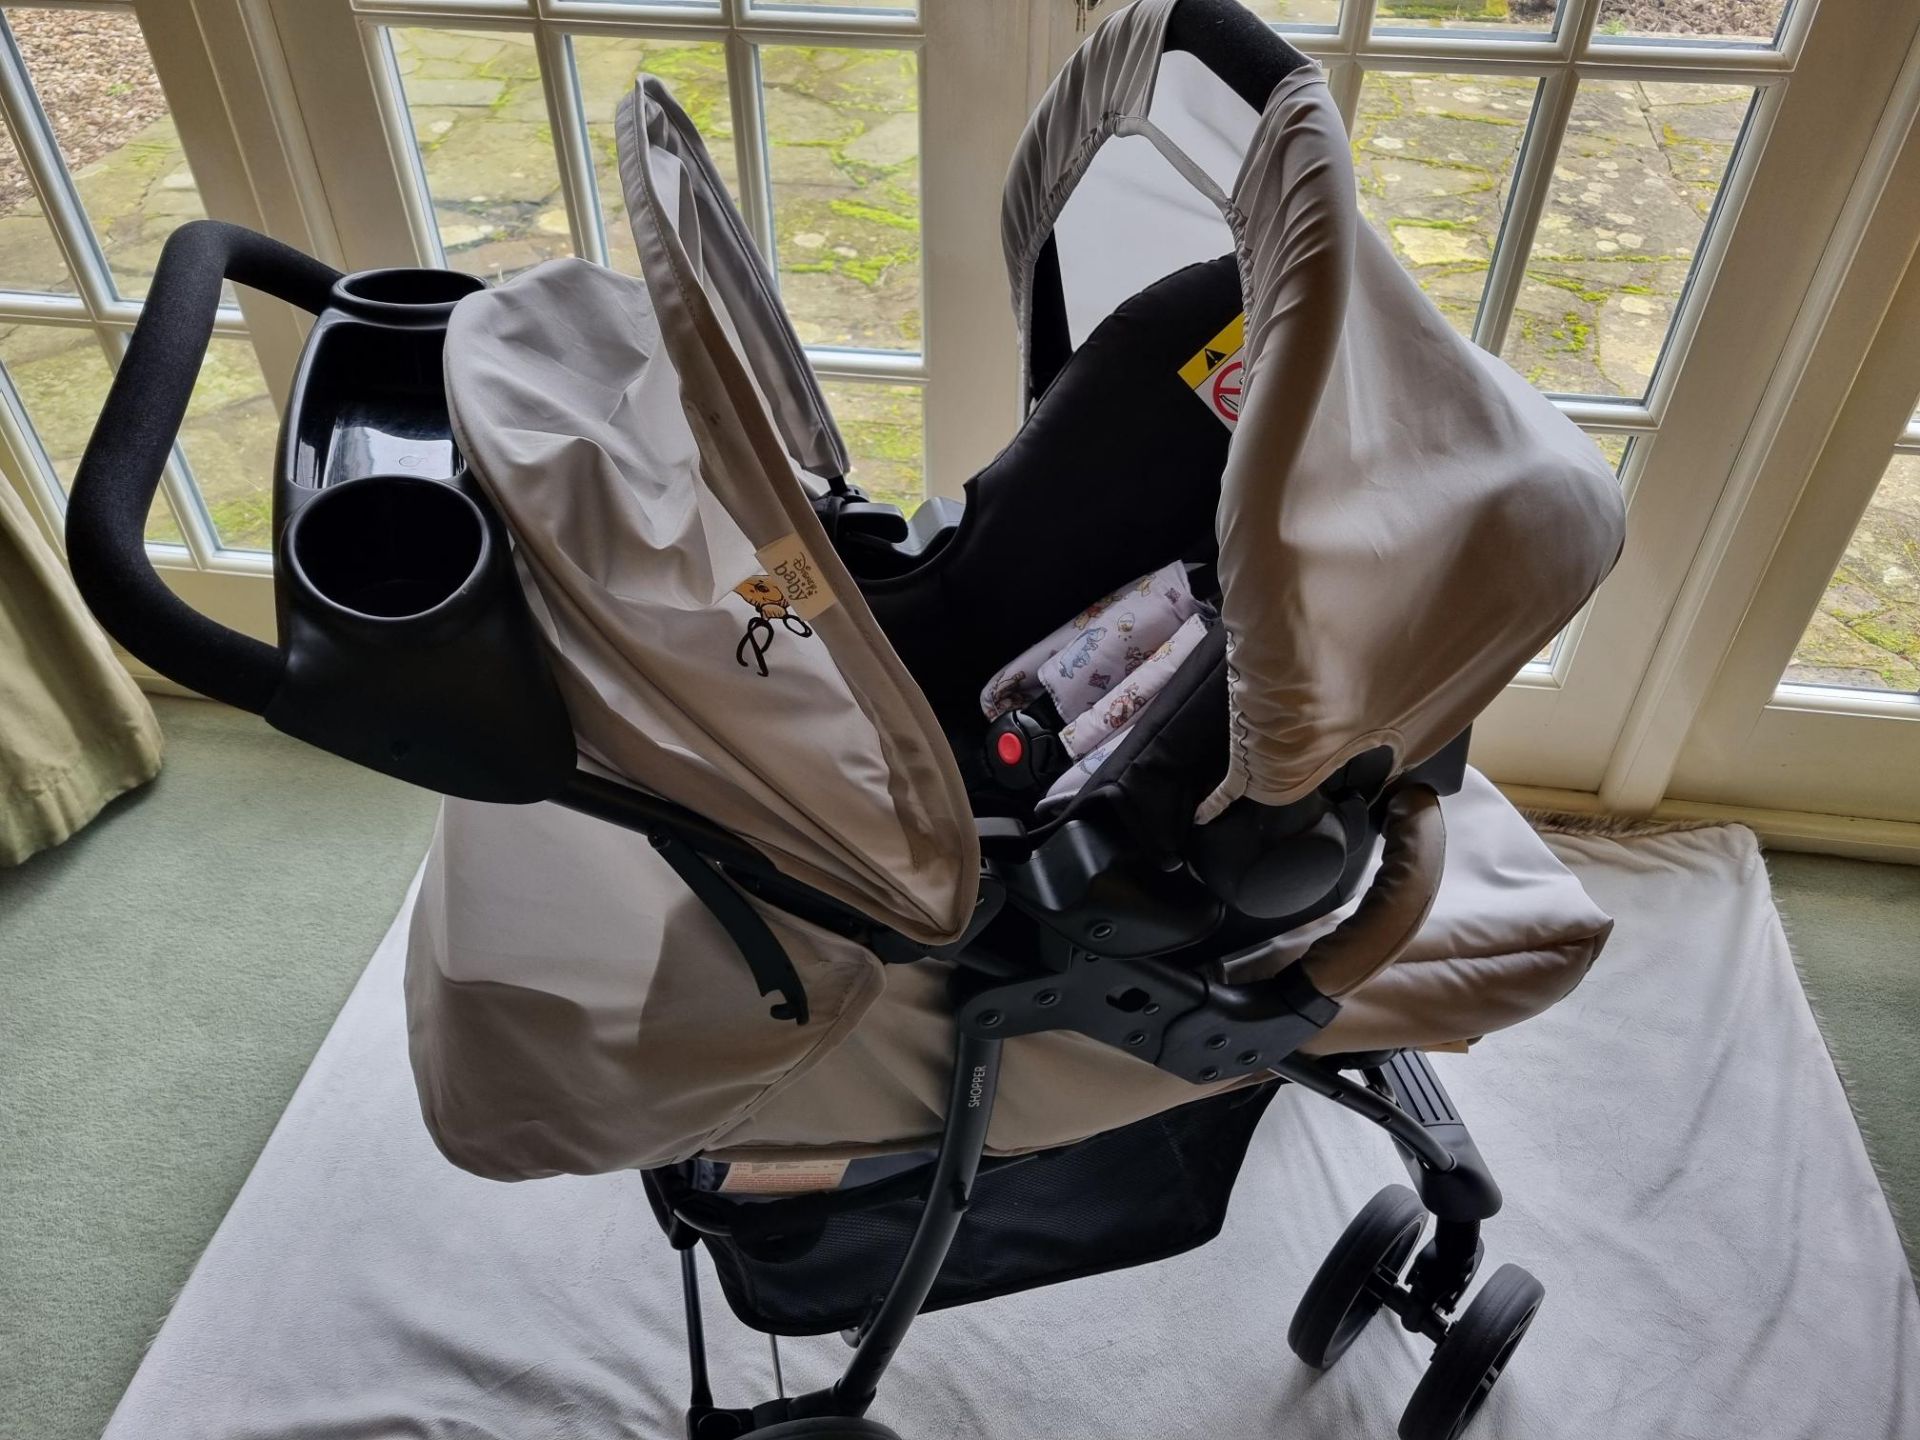 Hauck Disney Pushchair Travel System, Highchair, Tommee Tippee bottle warmer and case, playmat, toys - Image 8 of 24